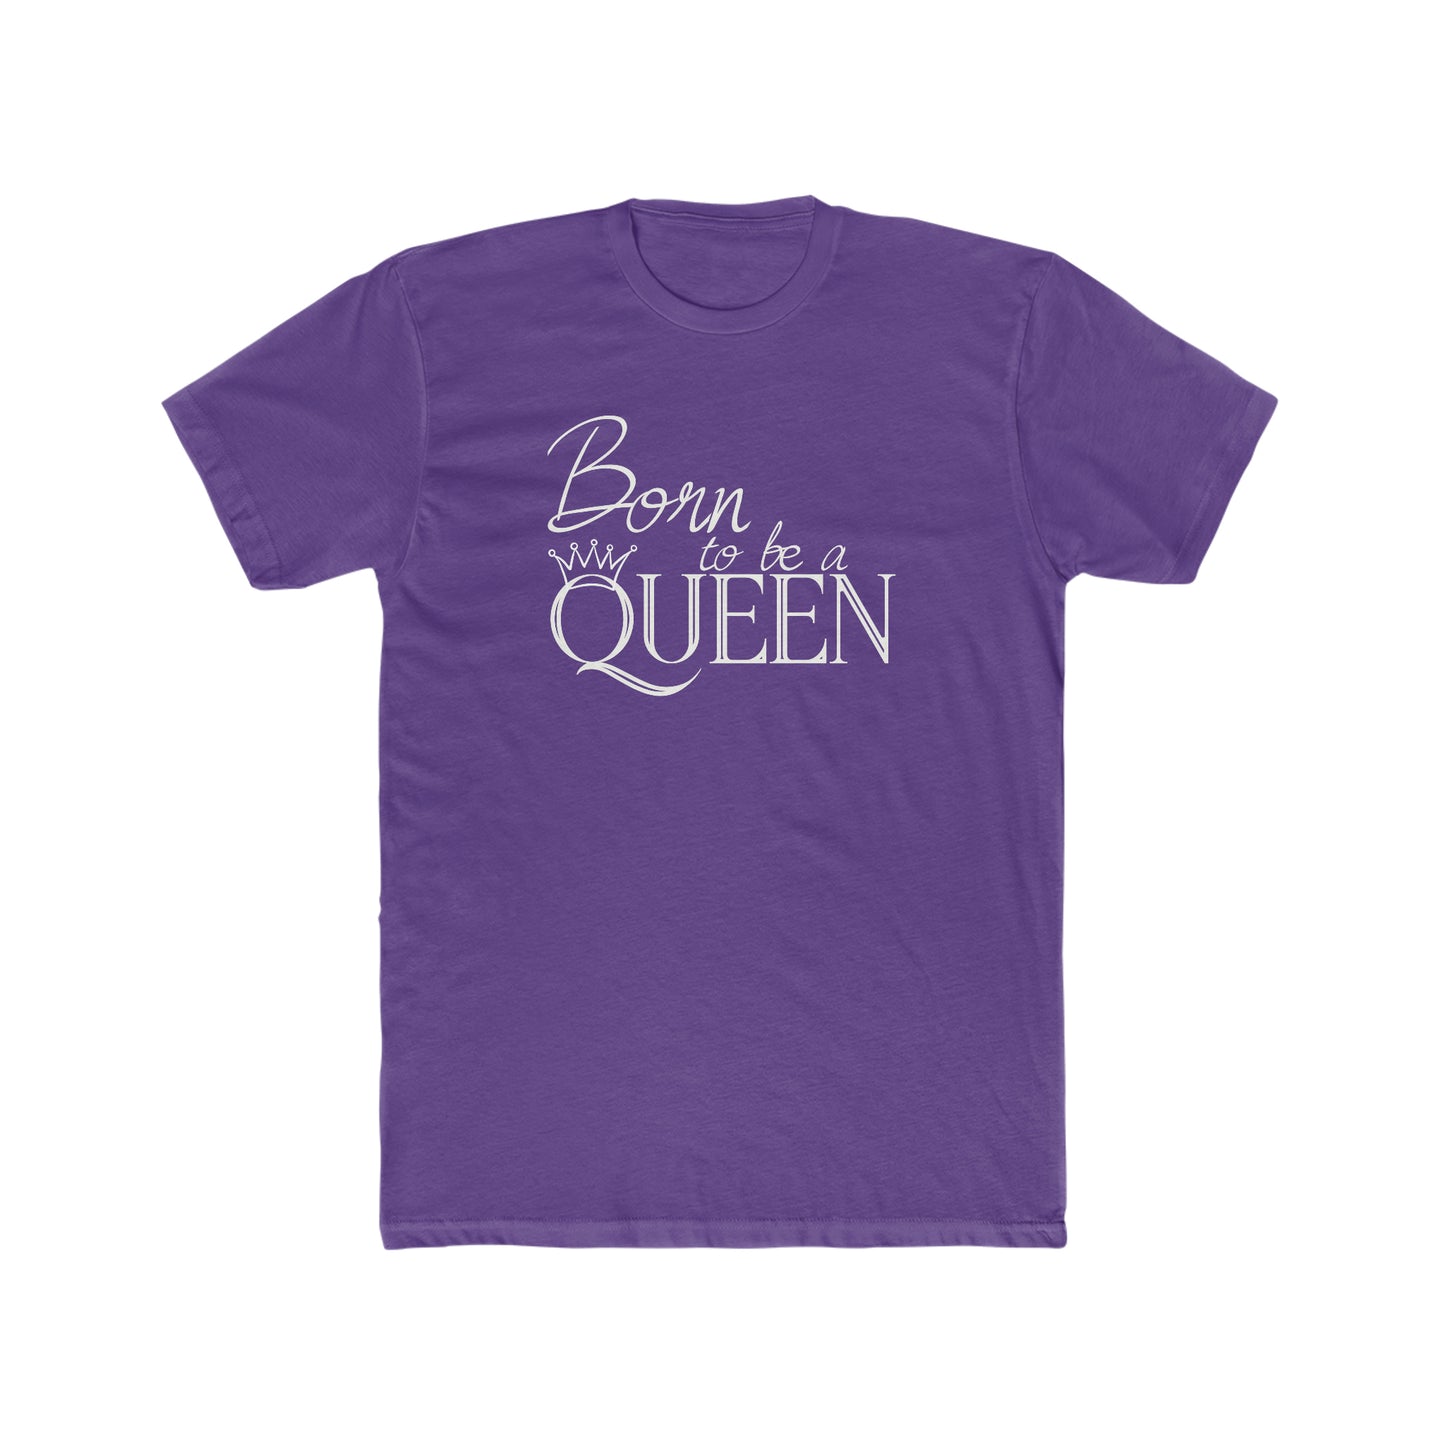 Born to be a Queen - Unisex Tee